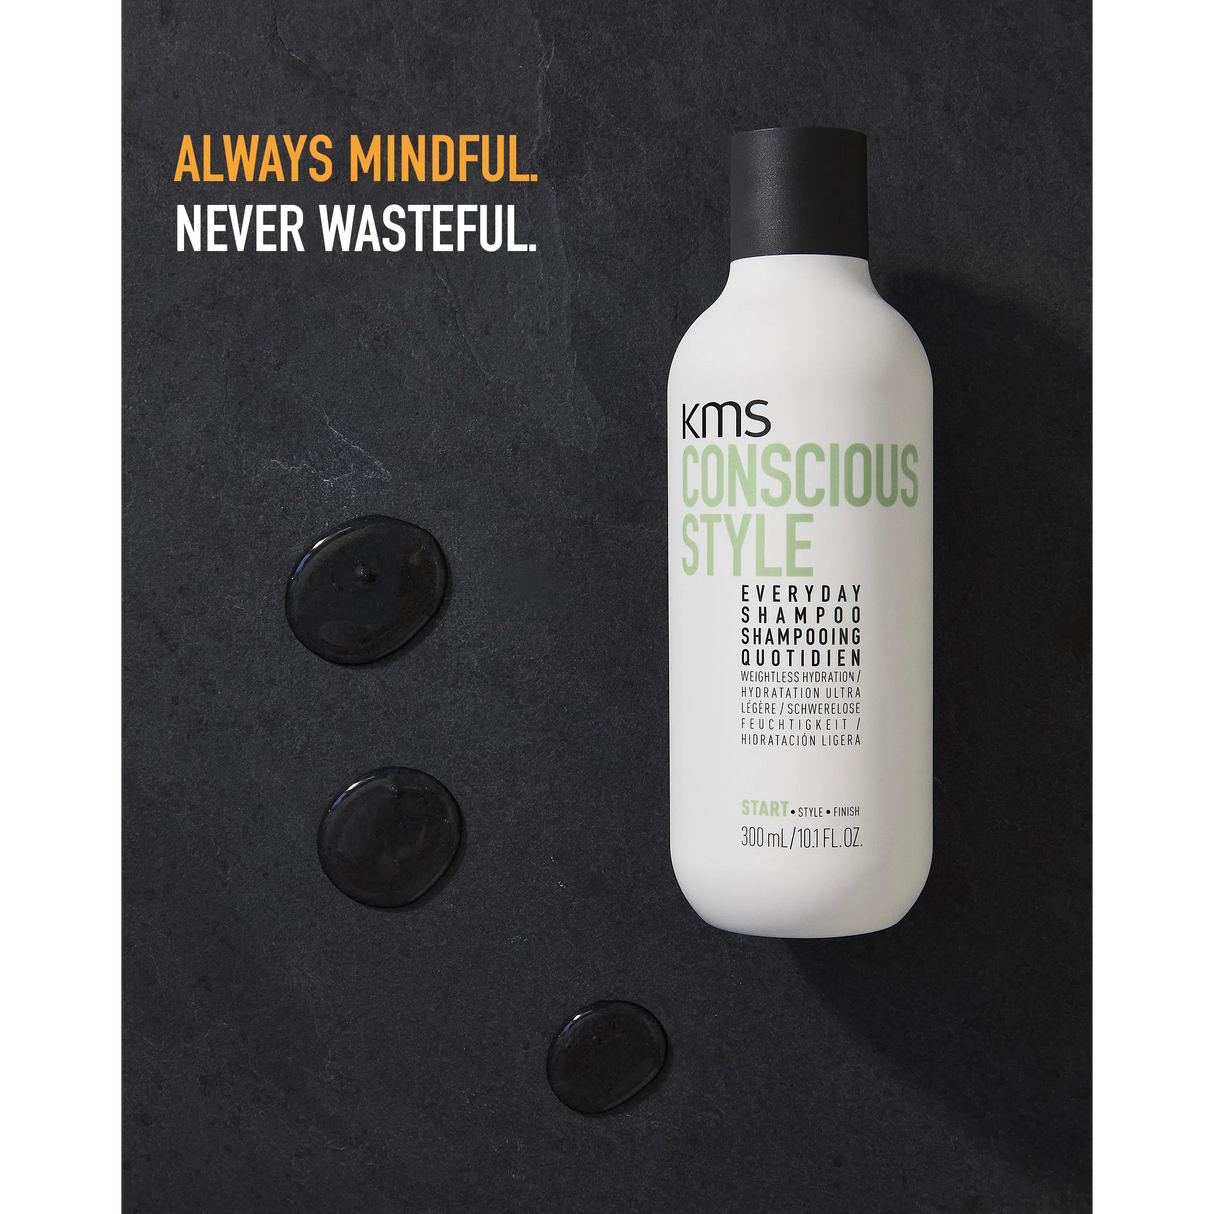 Conscious Style Everyday Shampoo-KMS